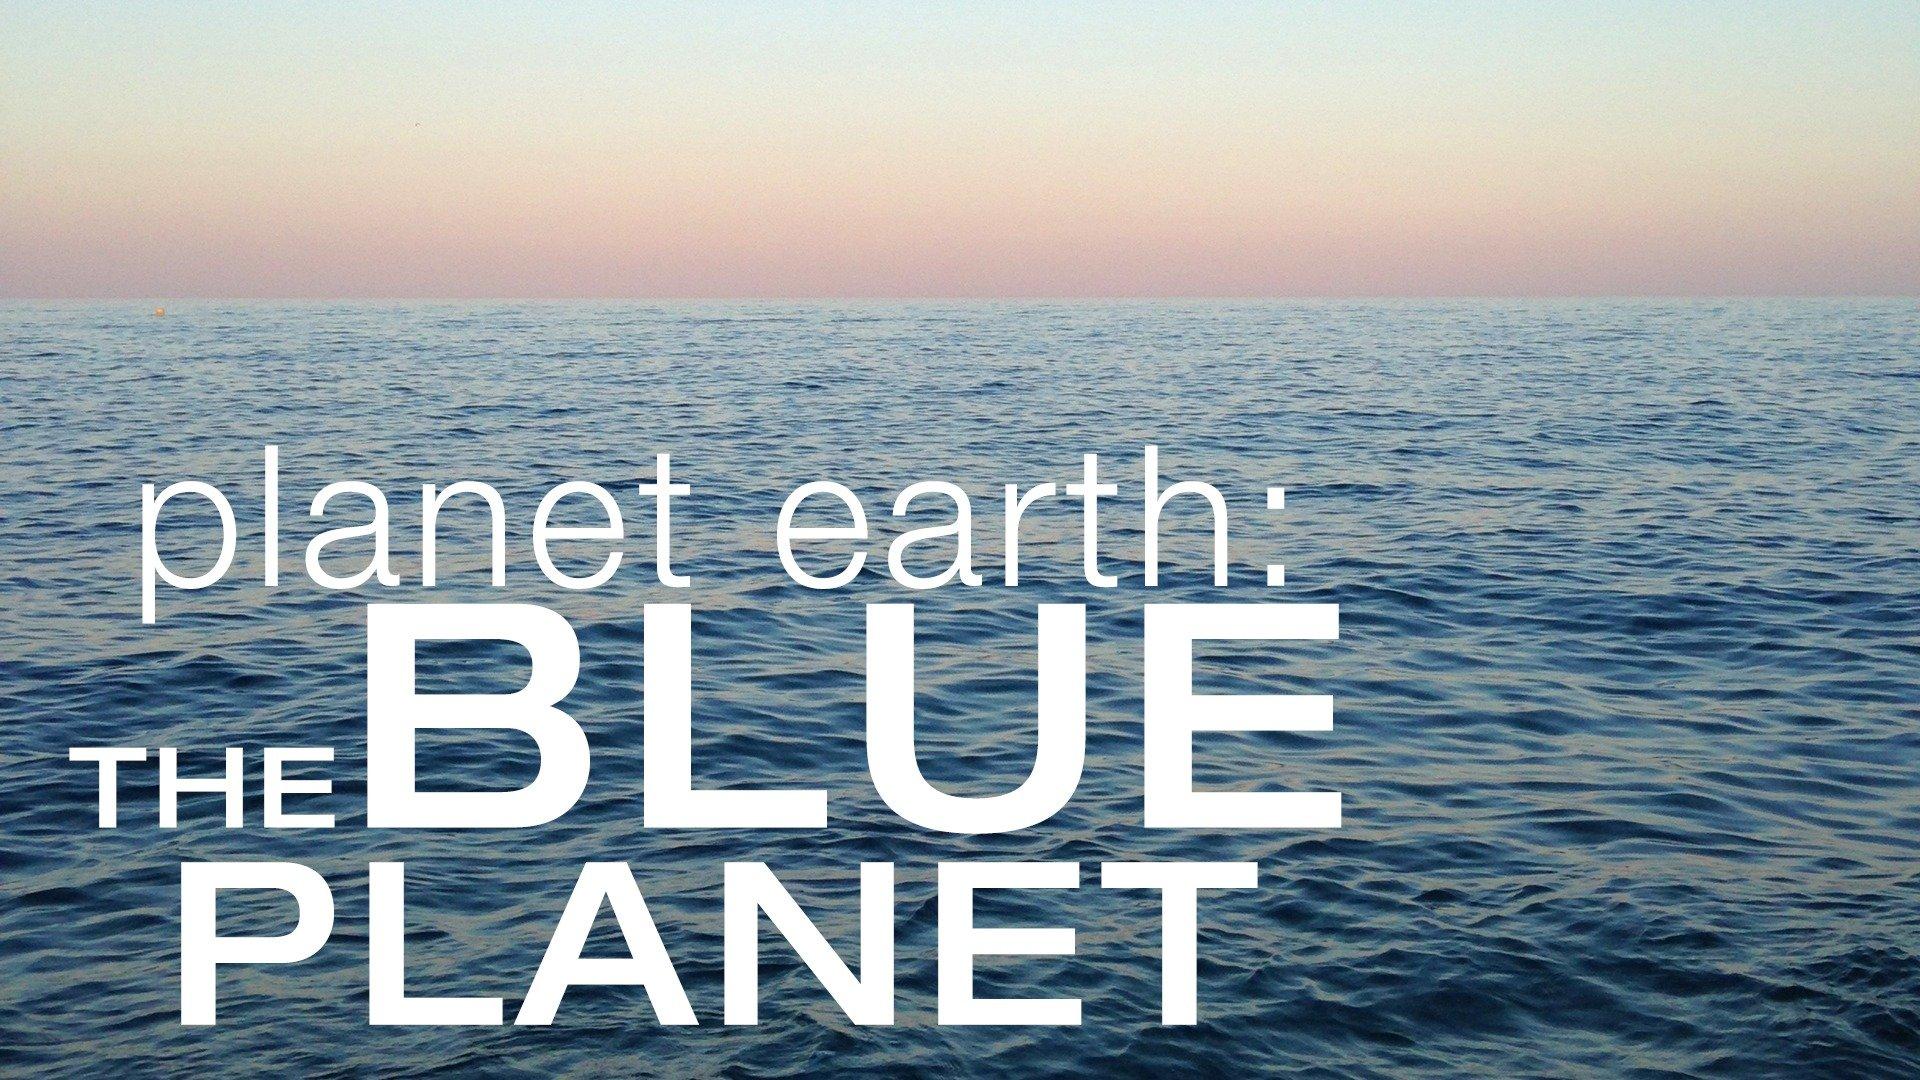 Planet Earth: The Blue Planet